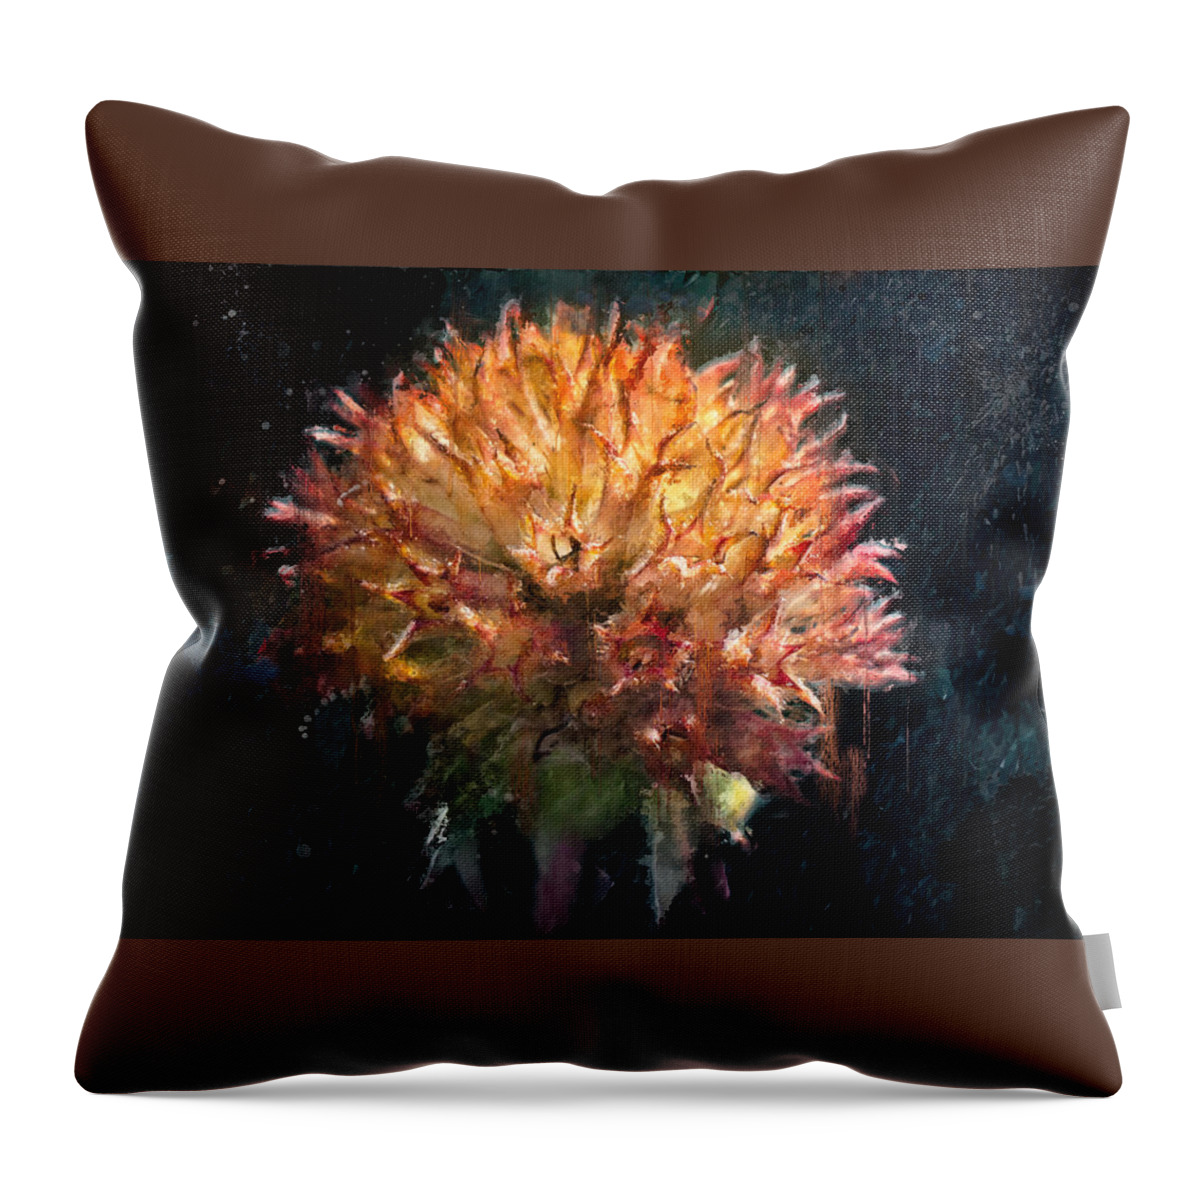 Flower Throw Pillow featuring the photograph Through Adversity by Carrie Hannigan